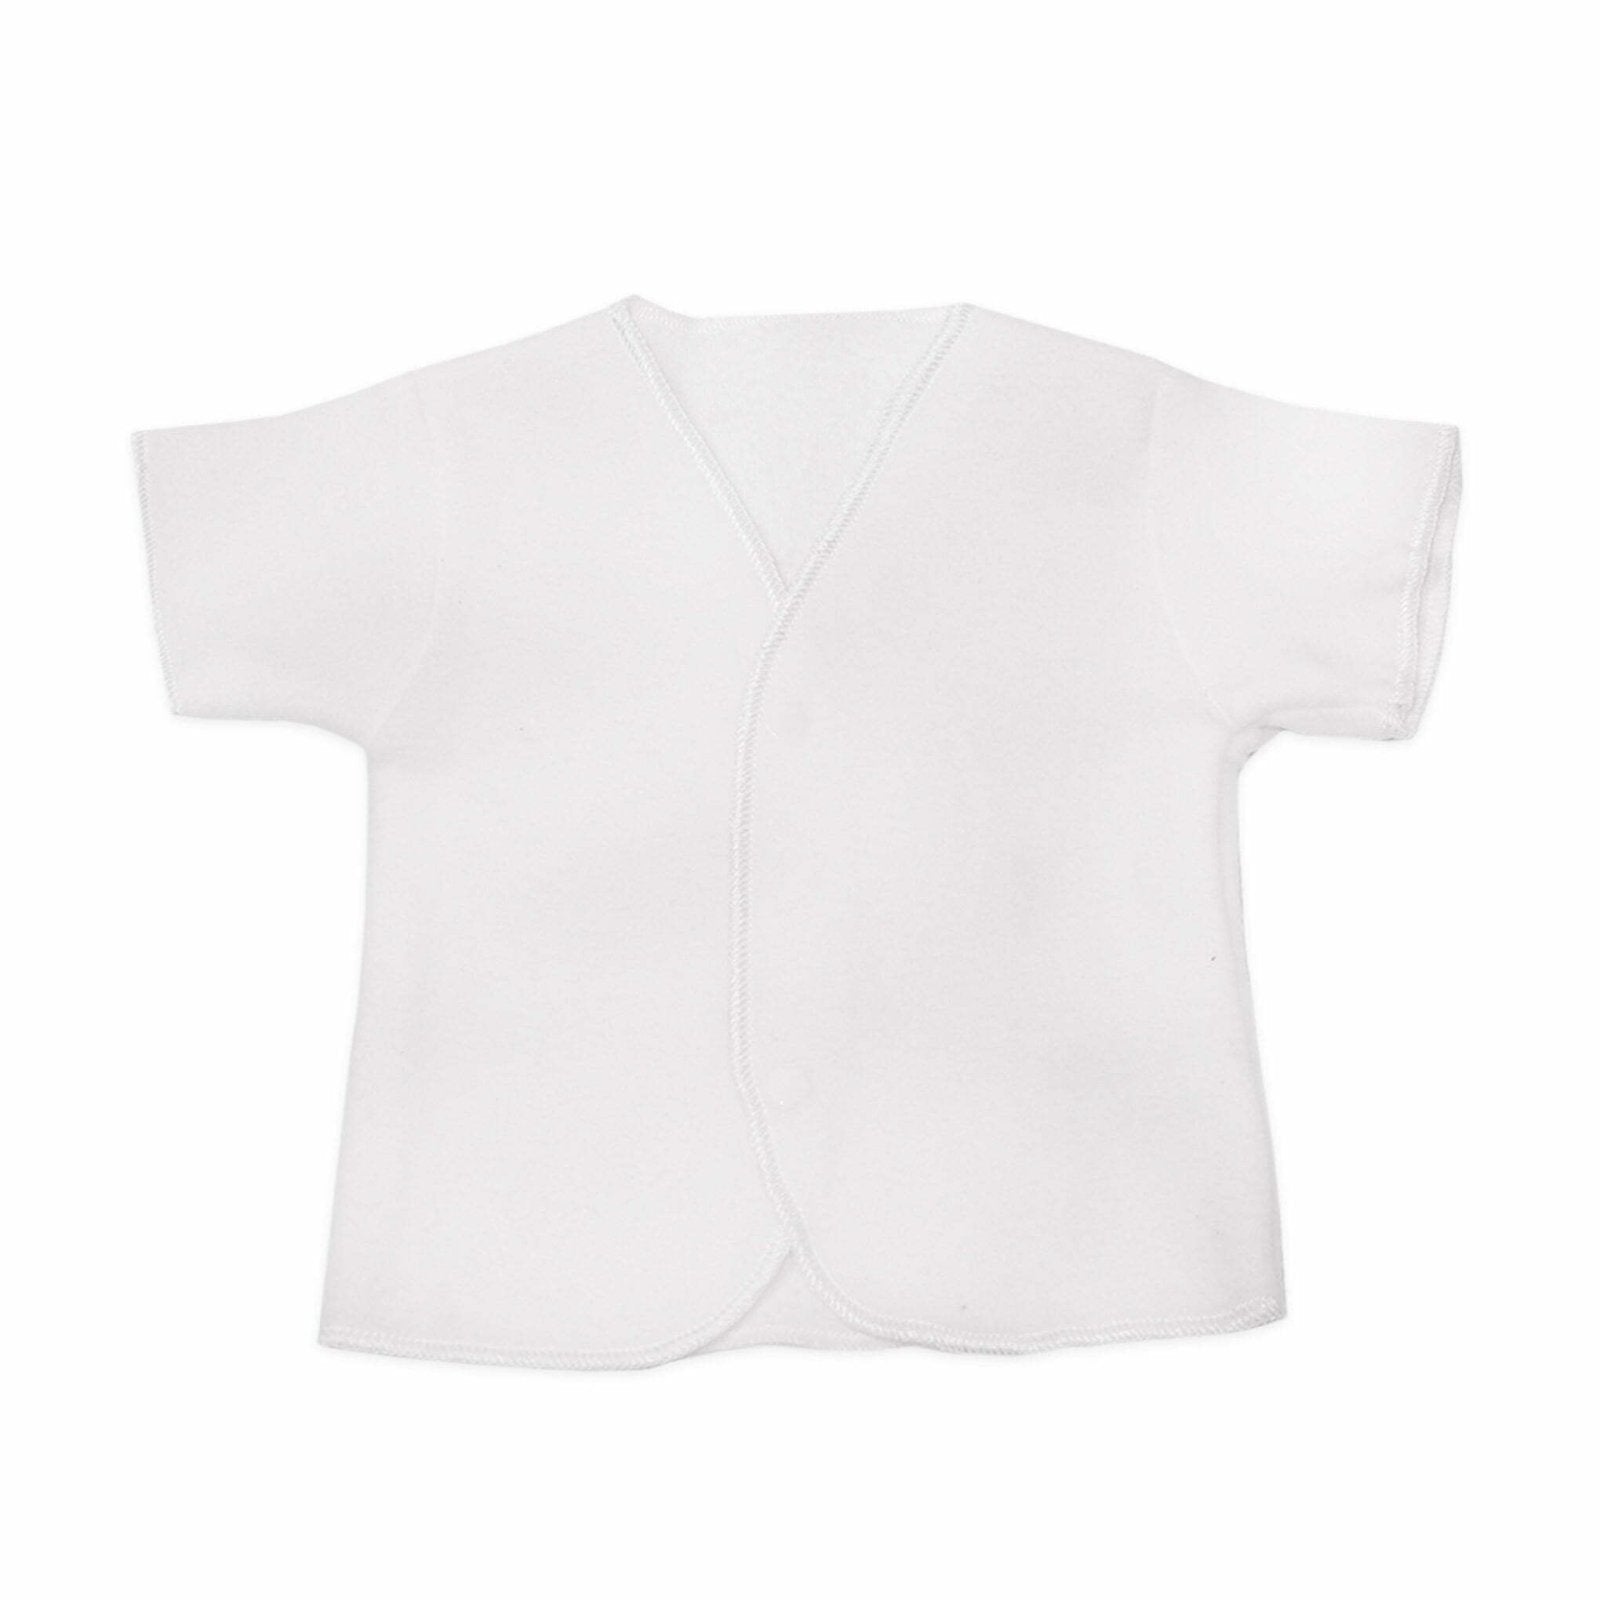 Pollar Vest White by Little Darling